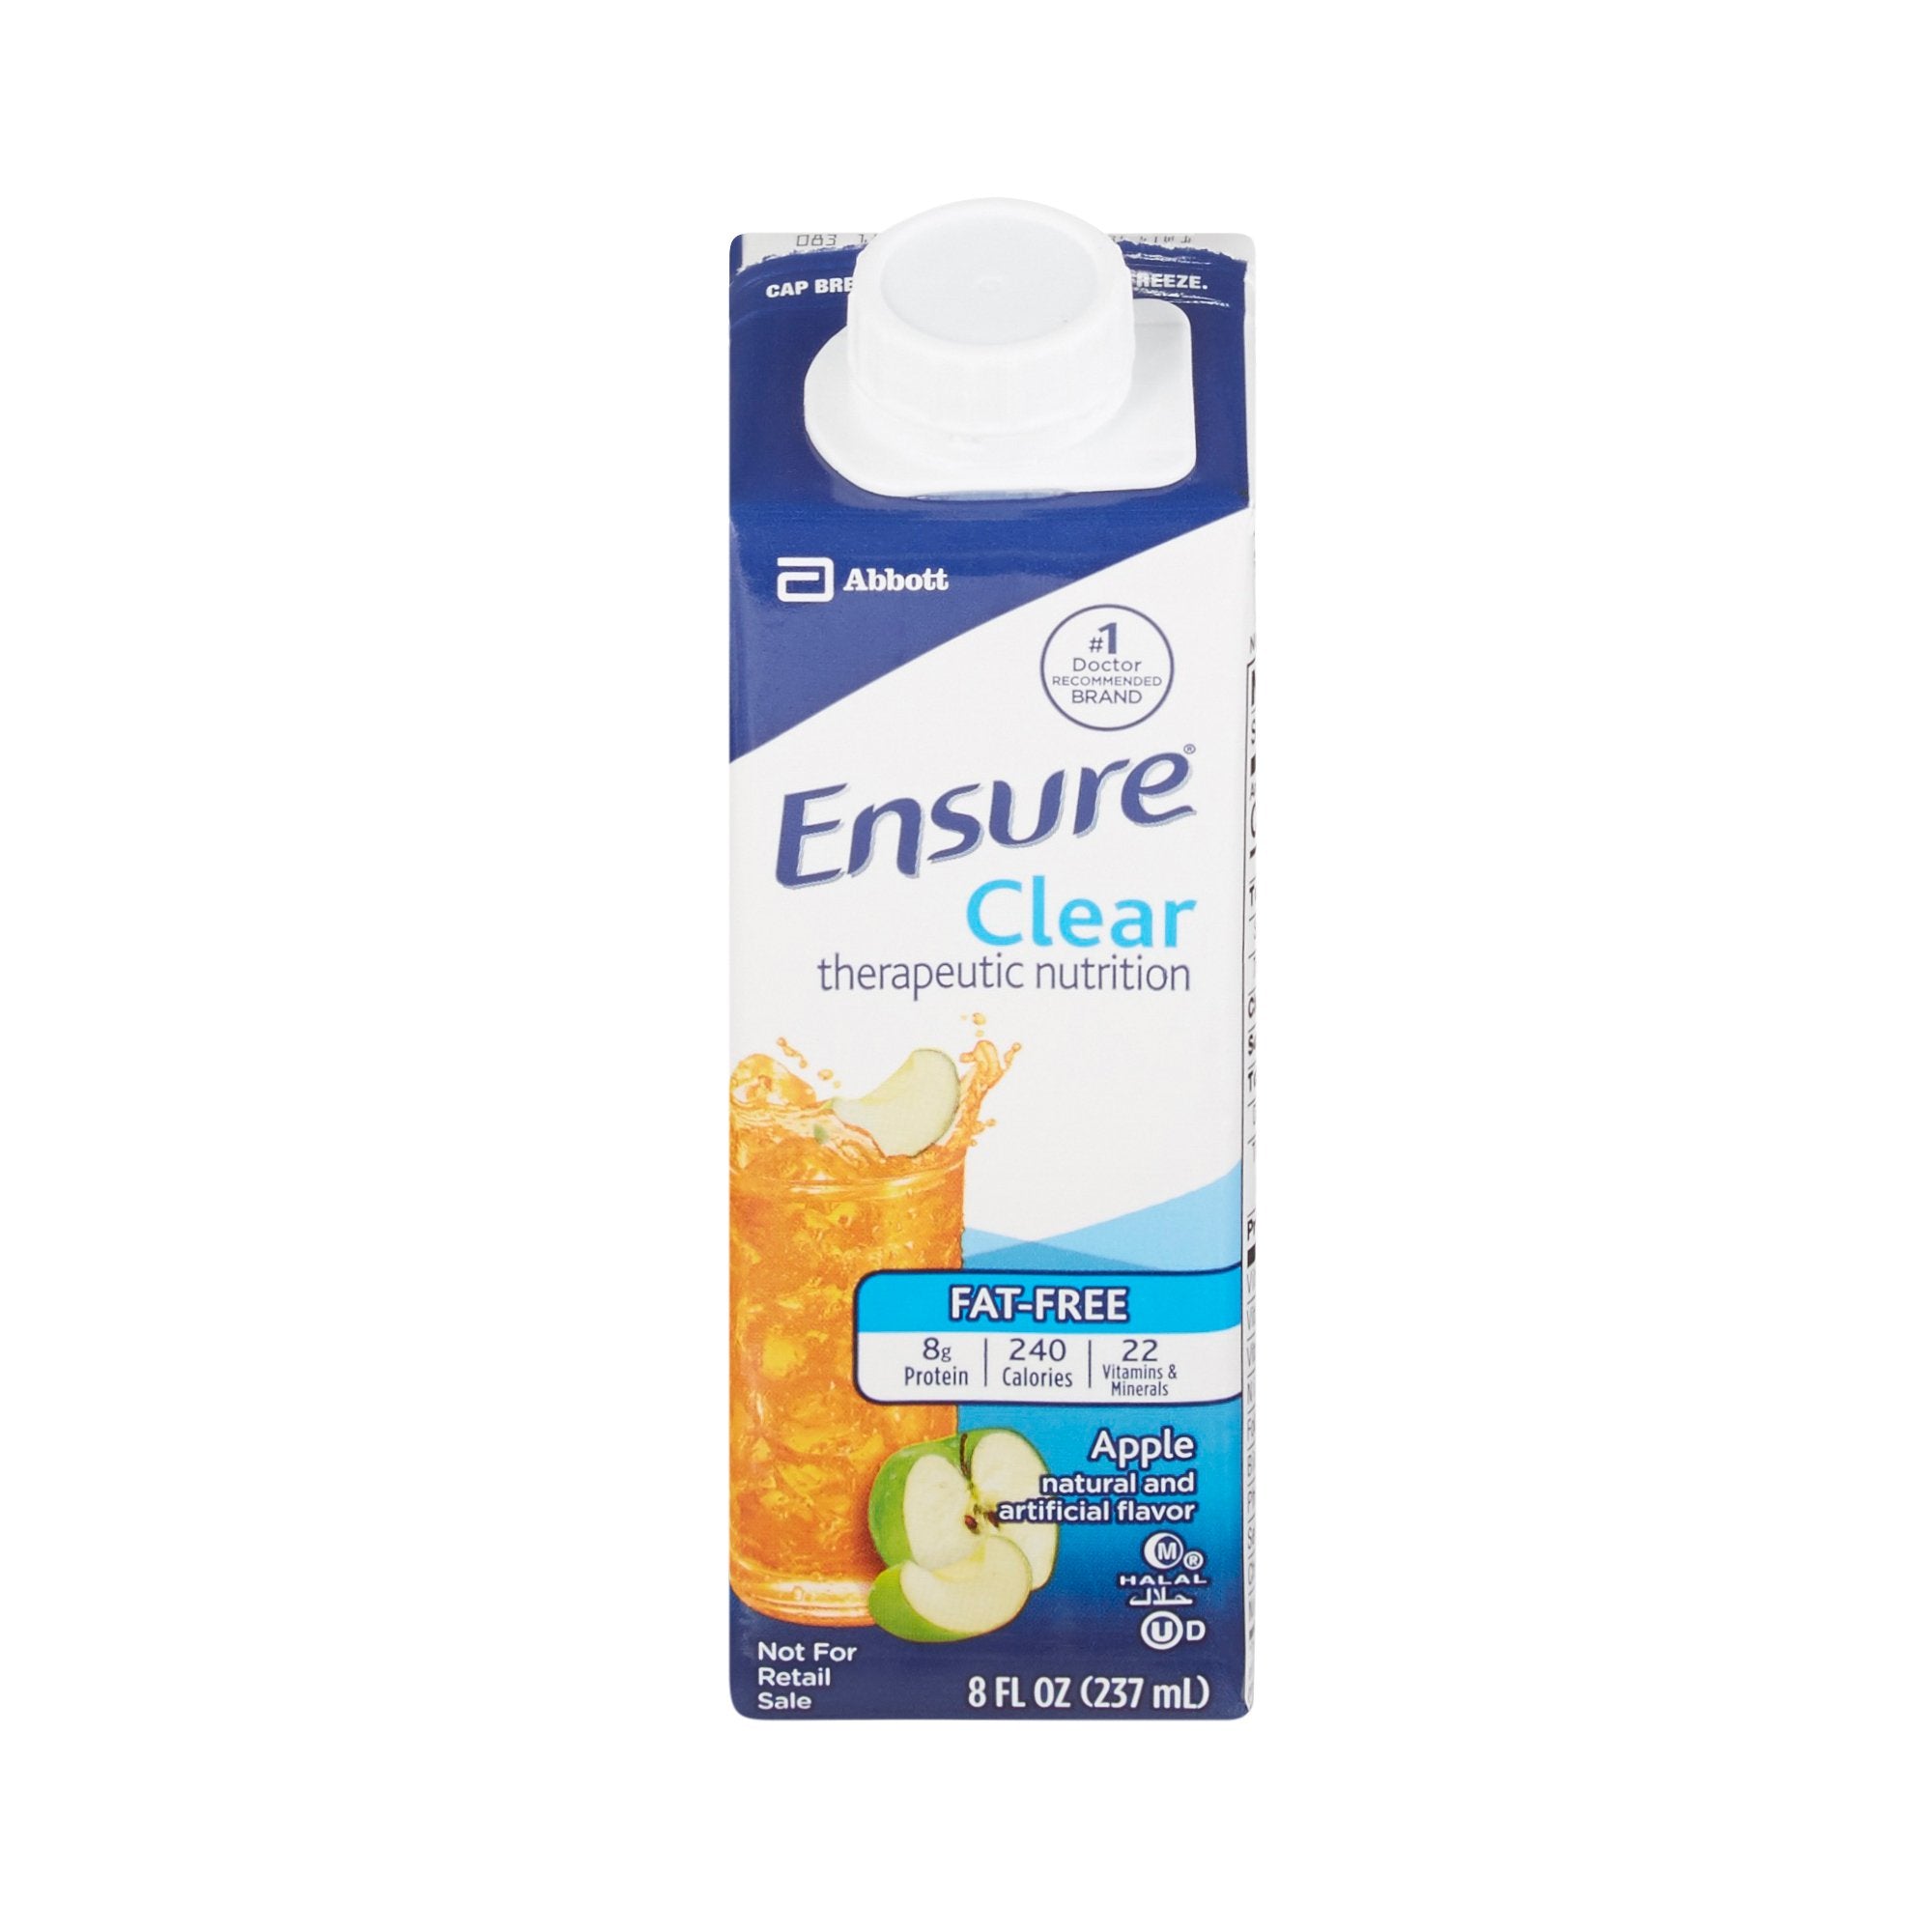 Ensure? Clear Therapeutic Nutrition Apple Oral Supplement, 8 oz. Carton